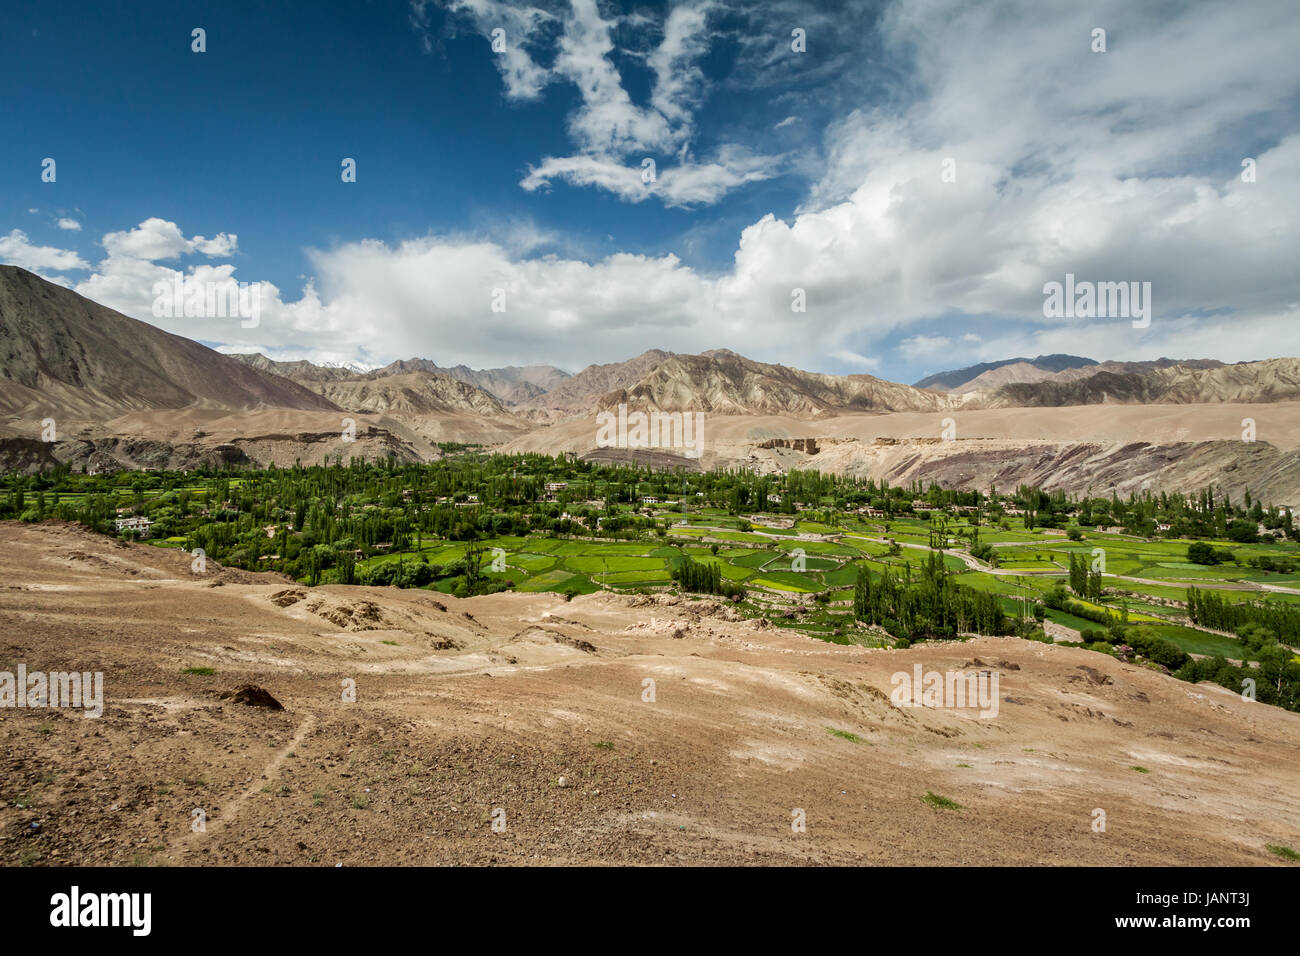 Desert Oasis at Alchi Village in Ladakh region of the Indian Himalaya. A beautiful landscape photography image of a lush green valley amidst barreness Stock Photo